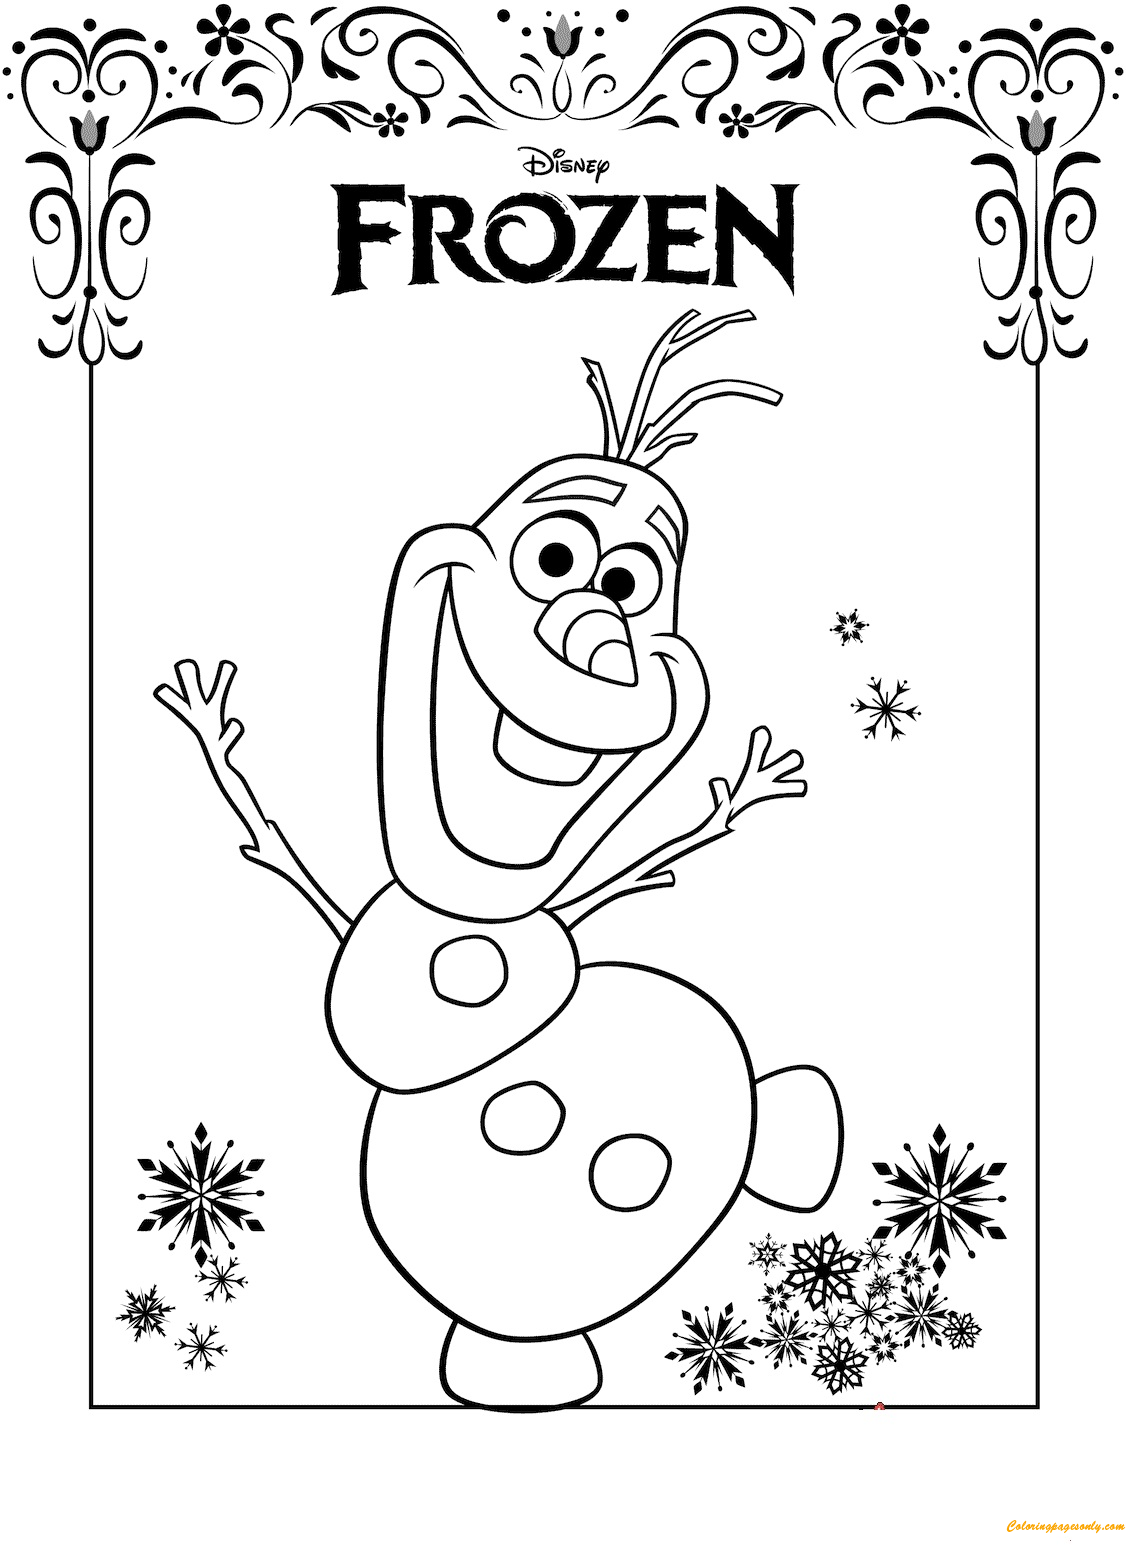 friendly-olaf-frozen-coloring-page-free-coloring-pages-online